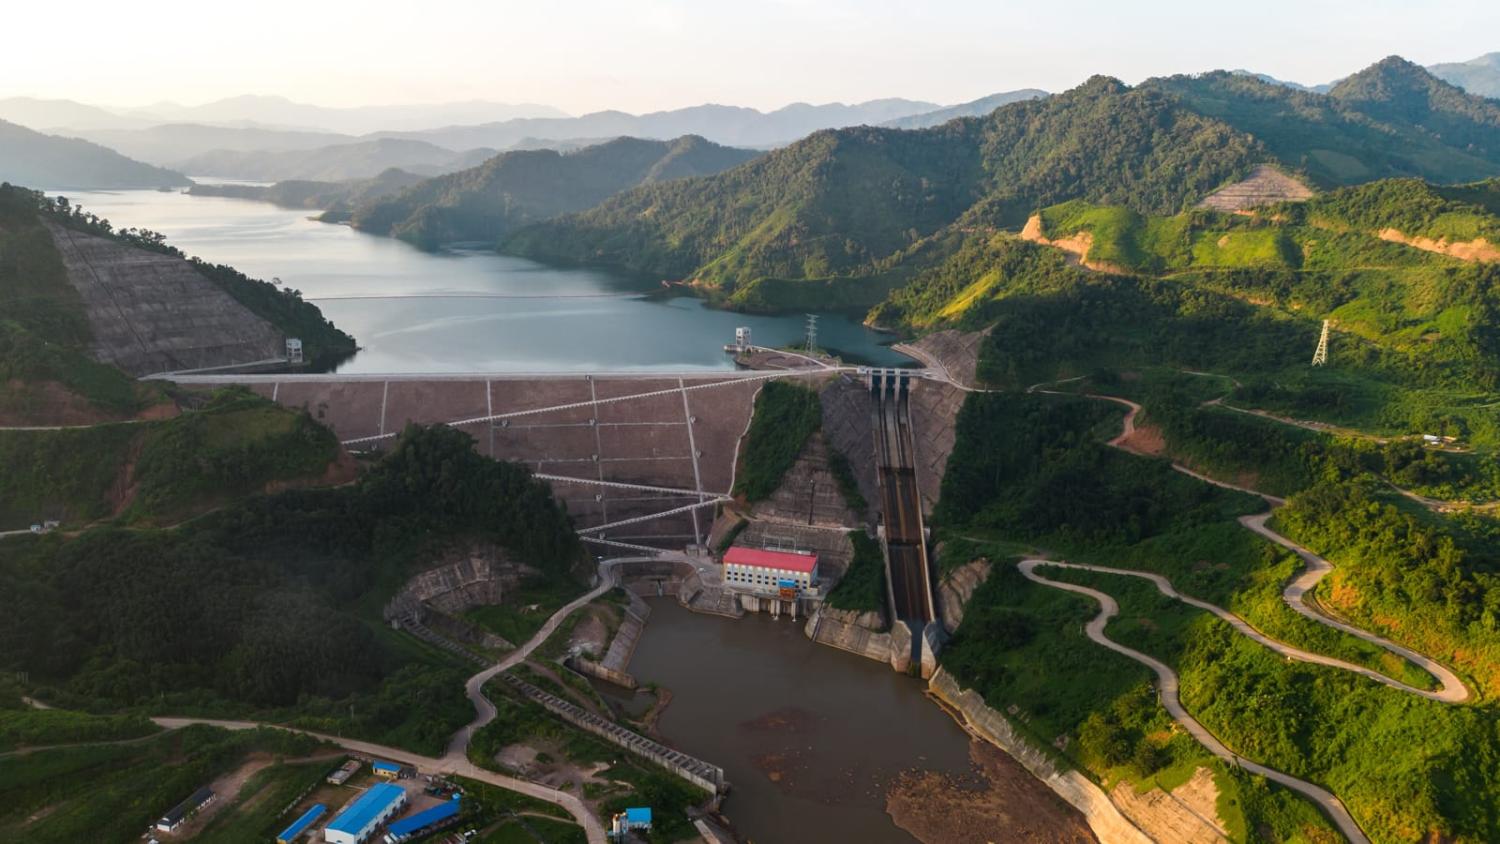 The Nam Ou Hydropower project in northern Laos, photographed in September last year, built by the Power Construction Corporation of China (Kaikeo Saiyasane/Xinhua via Getty Images)